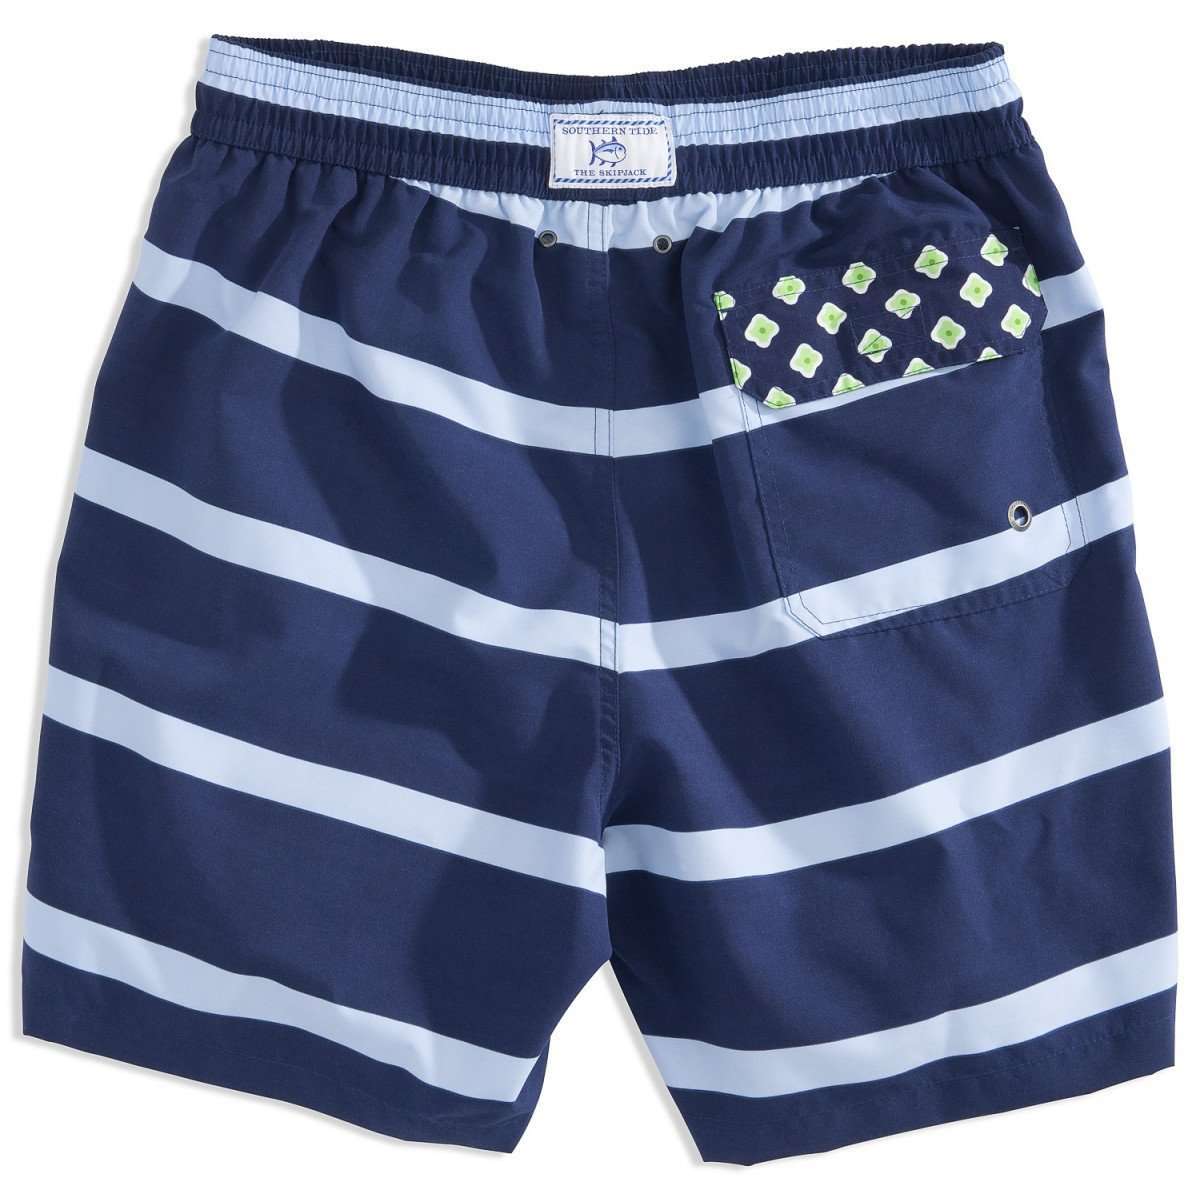 Riptide Swim Trunks in Navy by Southern Tide - Country Club Prep